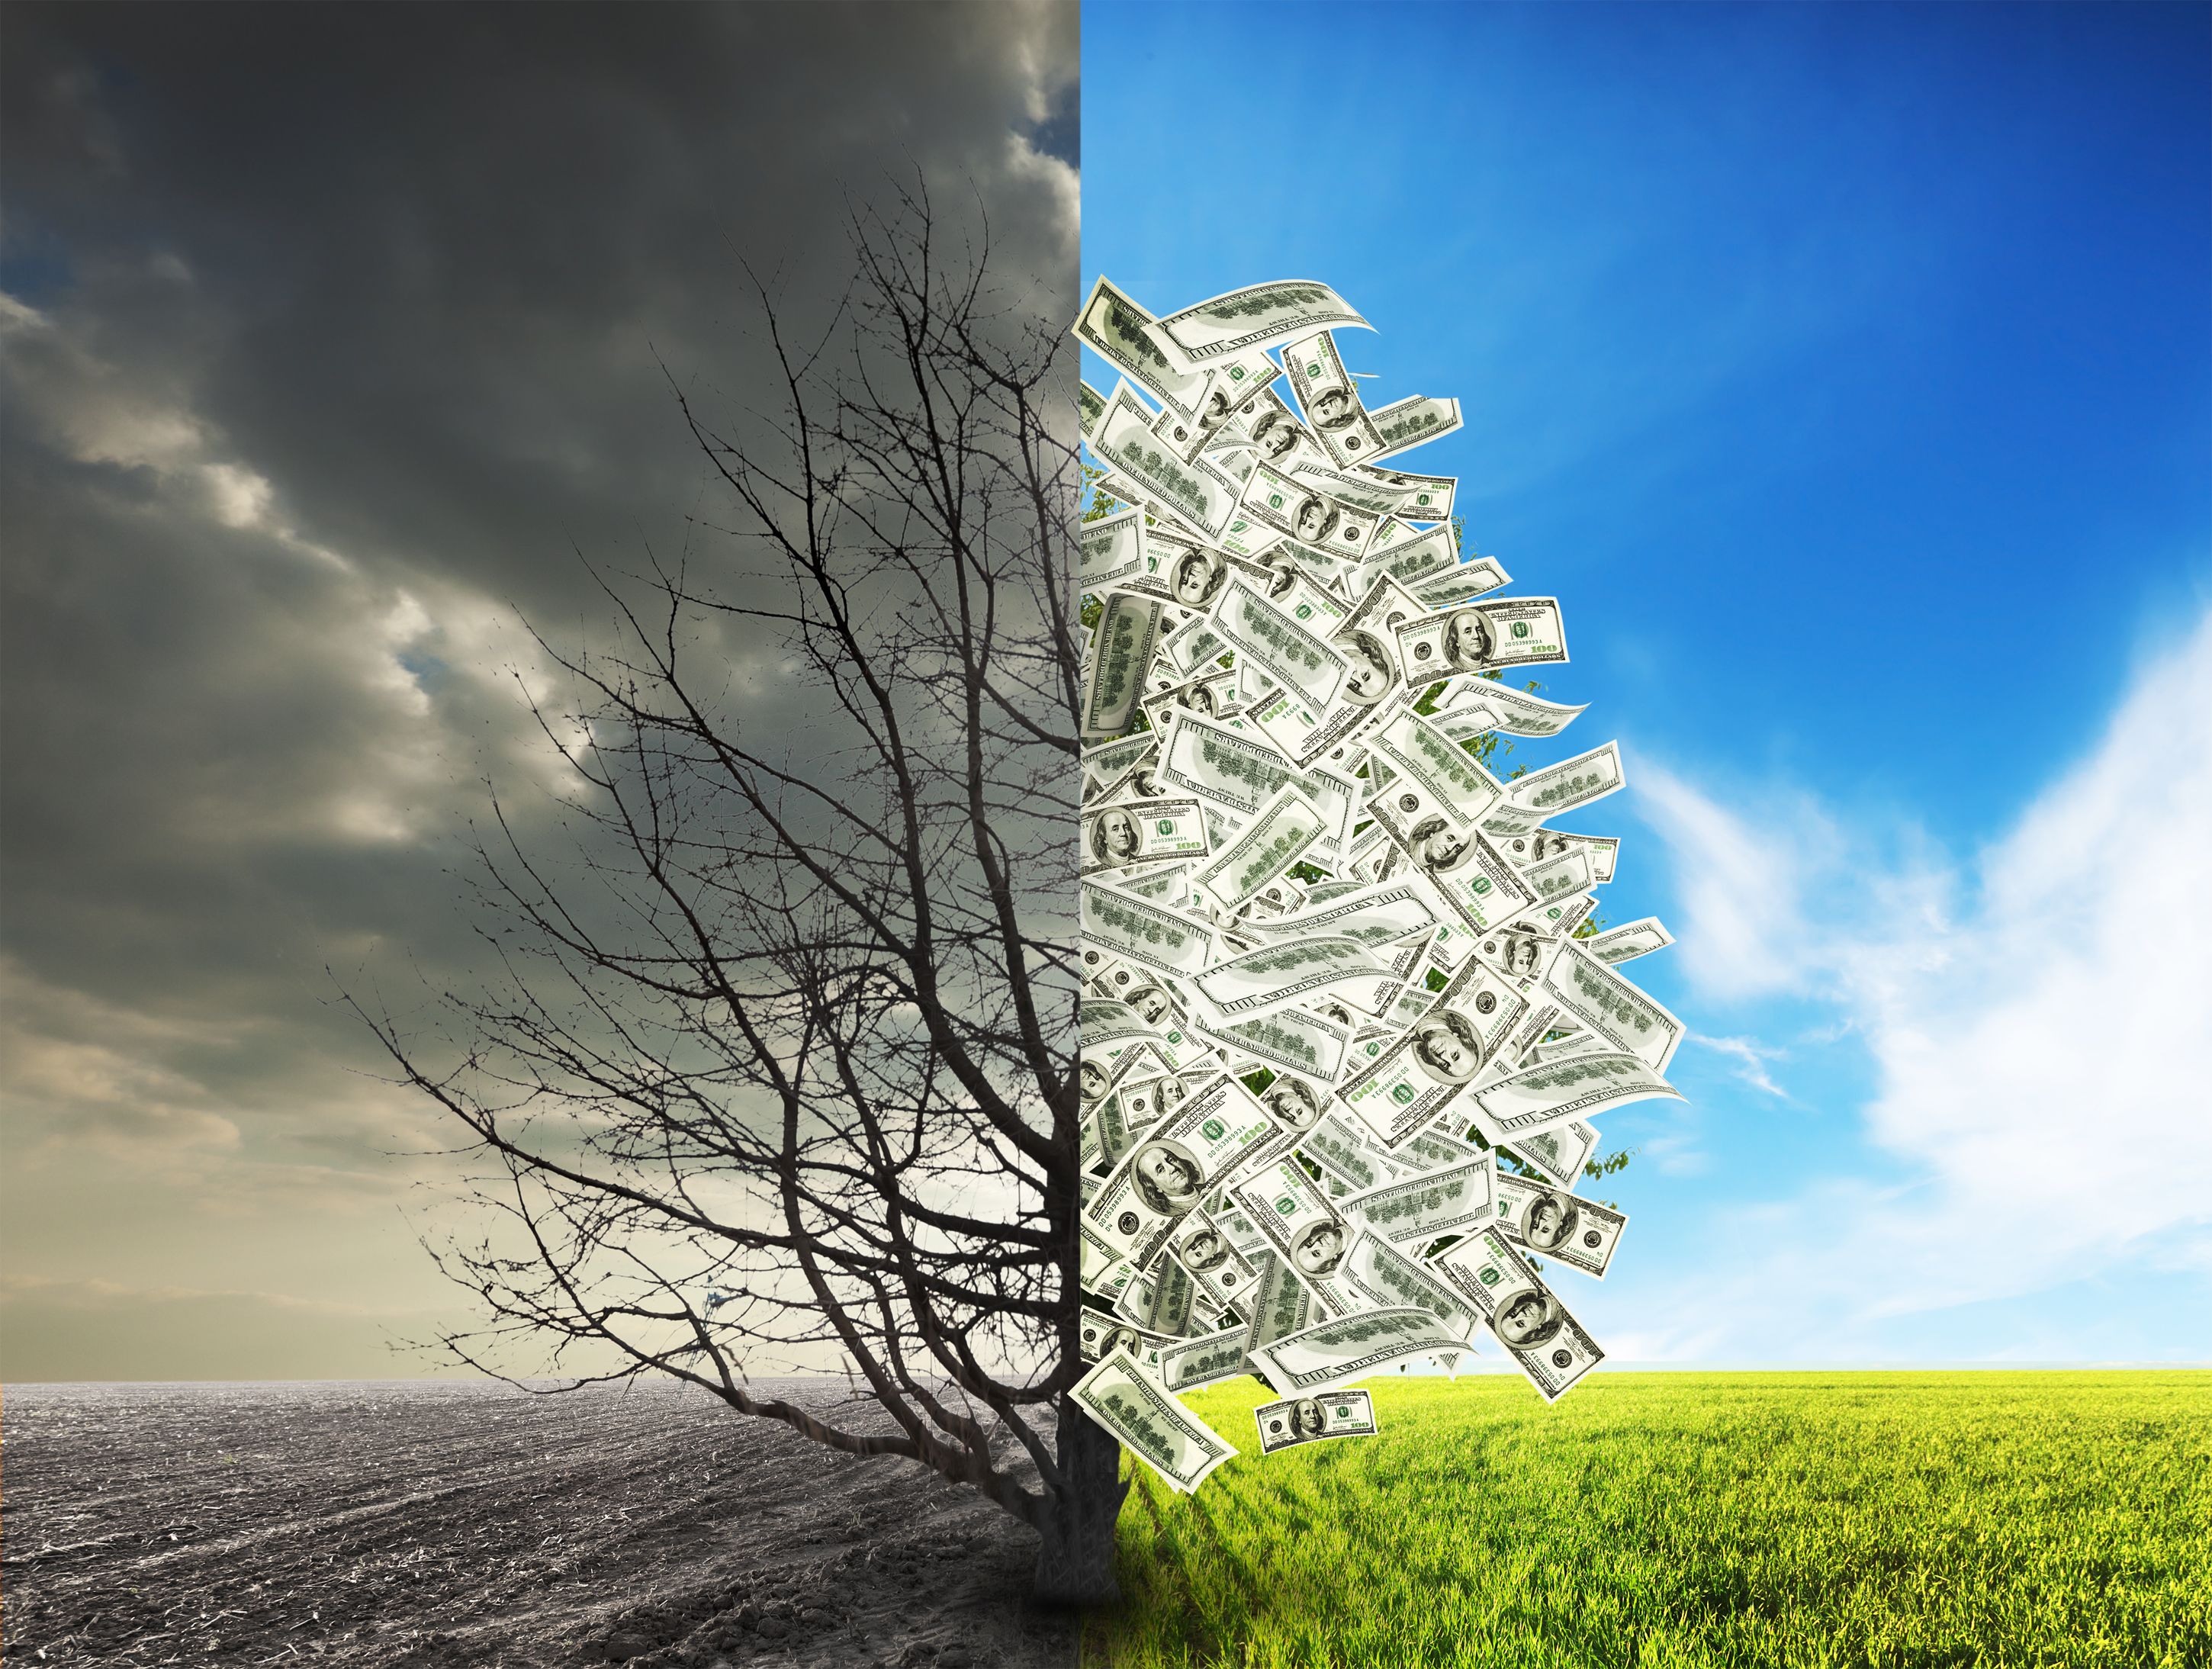 Image of a tree in a field, with half barren to represent debt and half flush with cash to represent success.